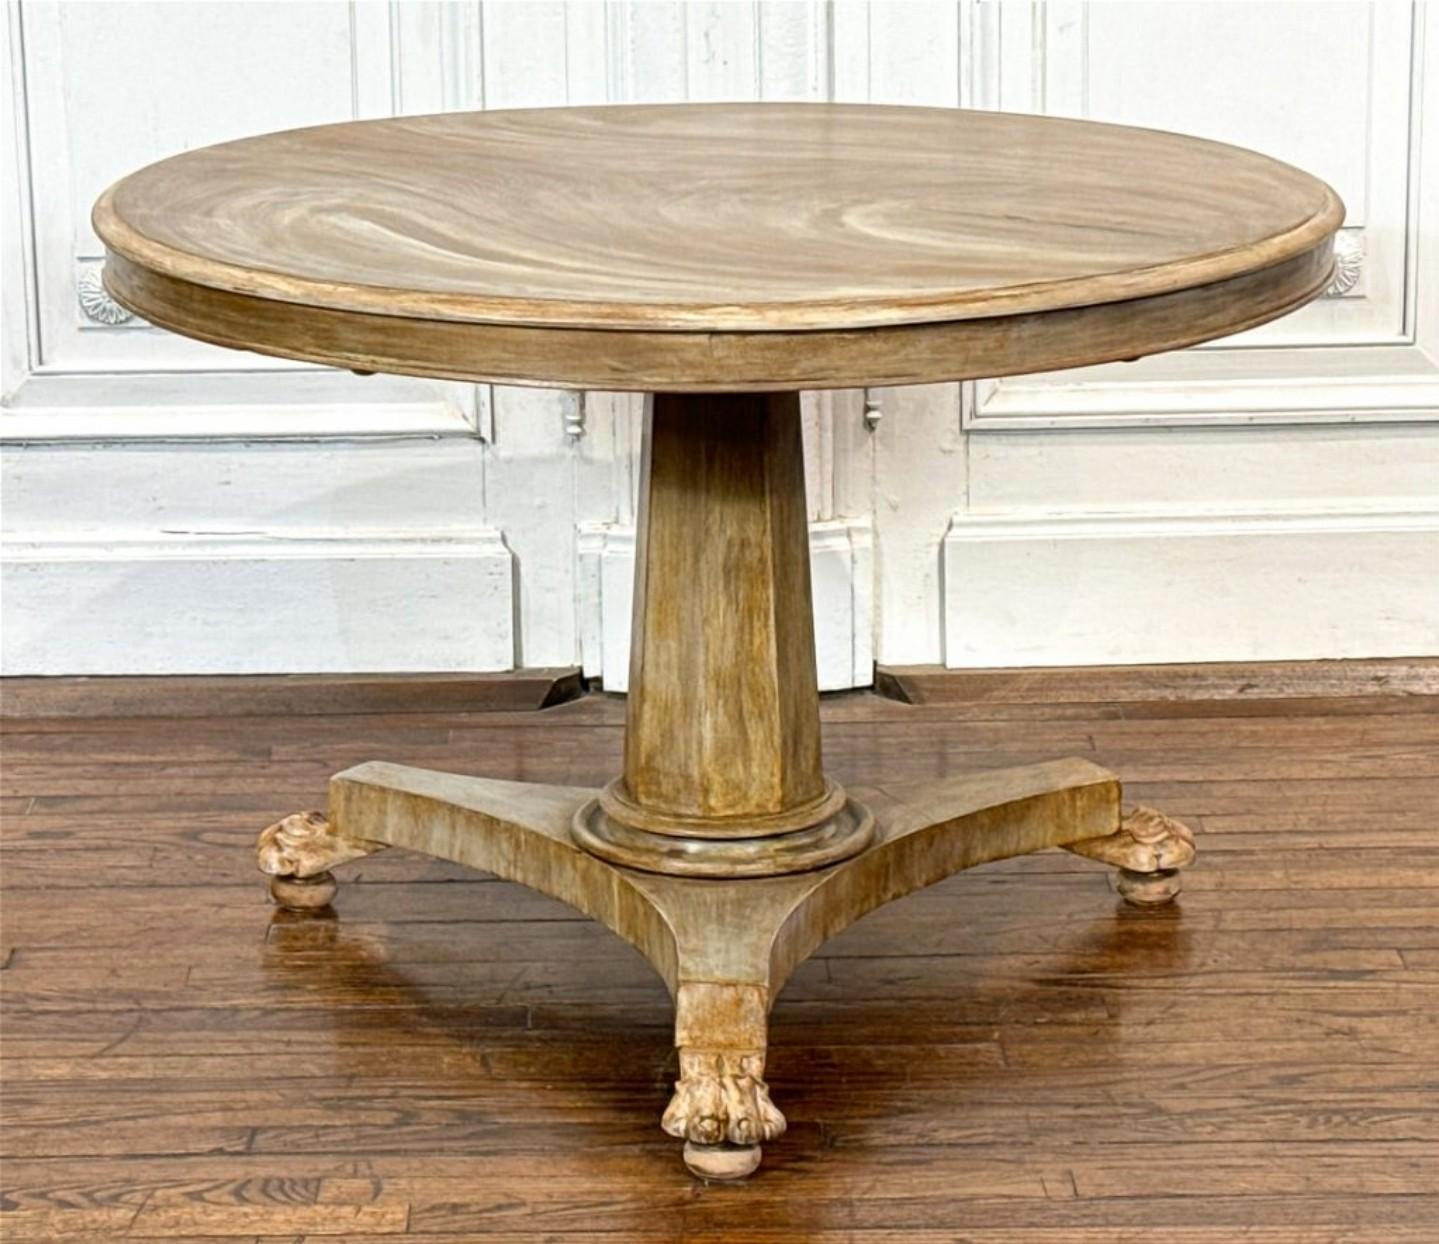 A striking antique European Palladian Neoclassical style later stripped bleached whitewashed mahogany pedestal center table.

19th century, having a round top with highly figured mahogany grain patterns, rising on a tapered faceted support,